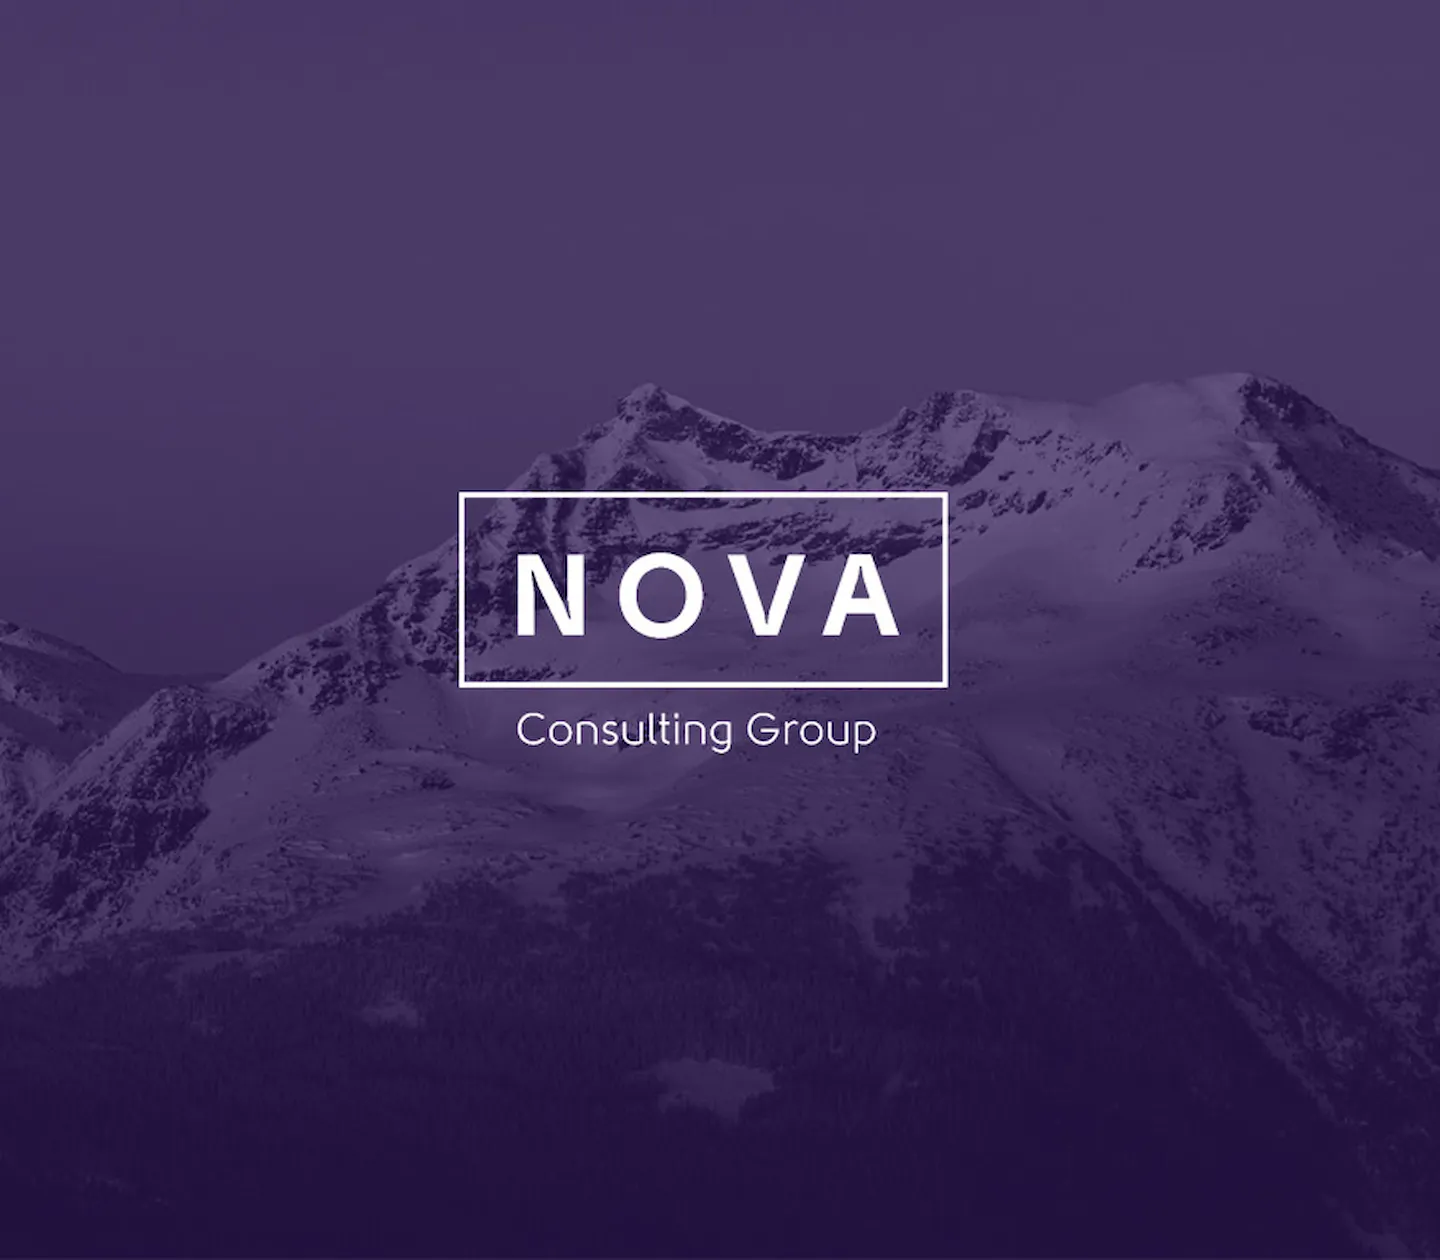 Nova Consulting Group image